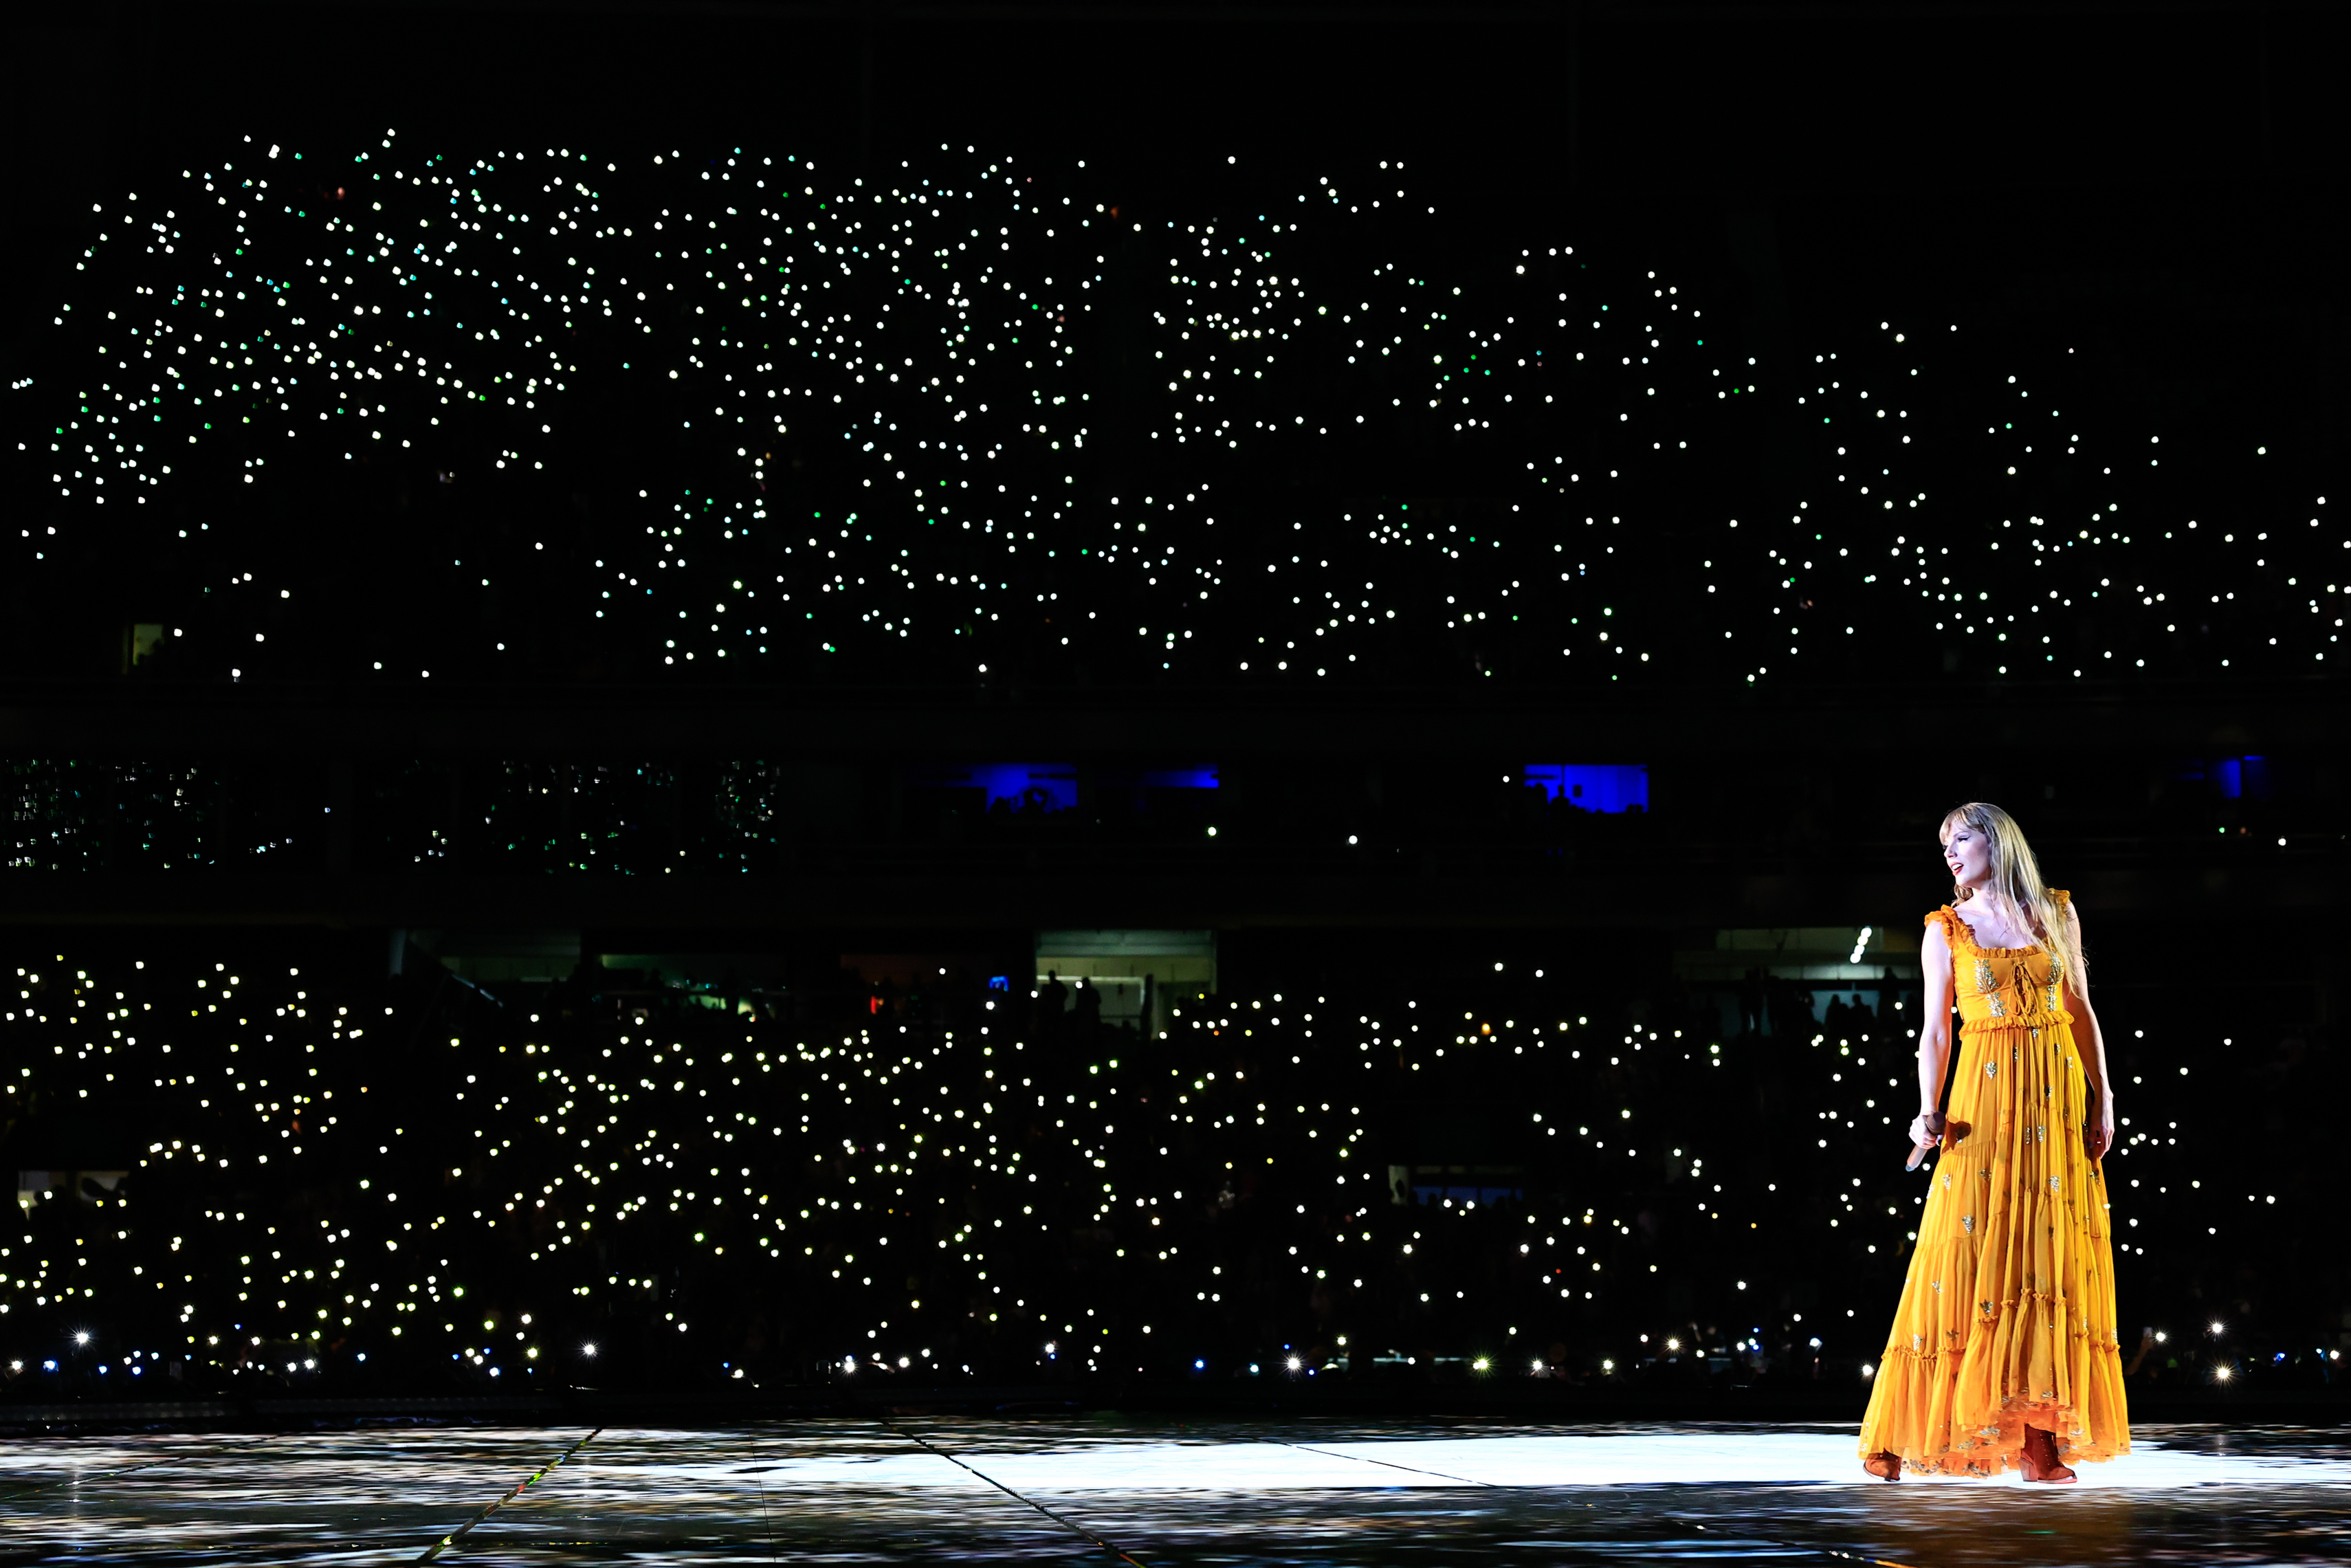 Taylor Swift onstage with lights from the crowd behind her